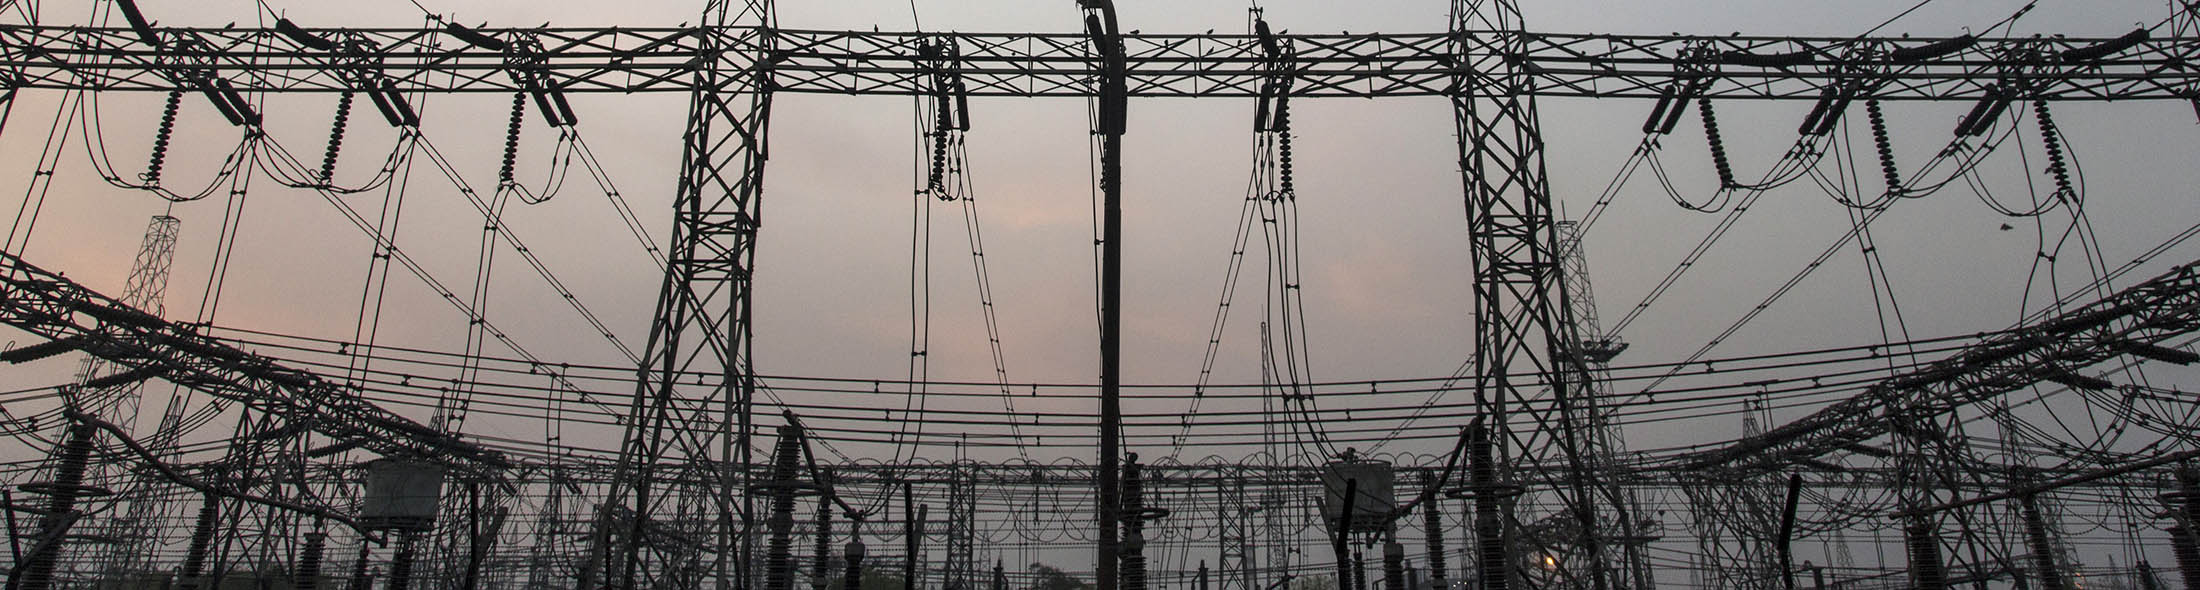 Powergrid wires at the 1500 MW PPCL Gas based power plant in Bawana, New Delhi, India on May 3, 2016.
